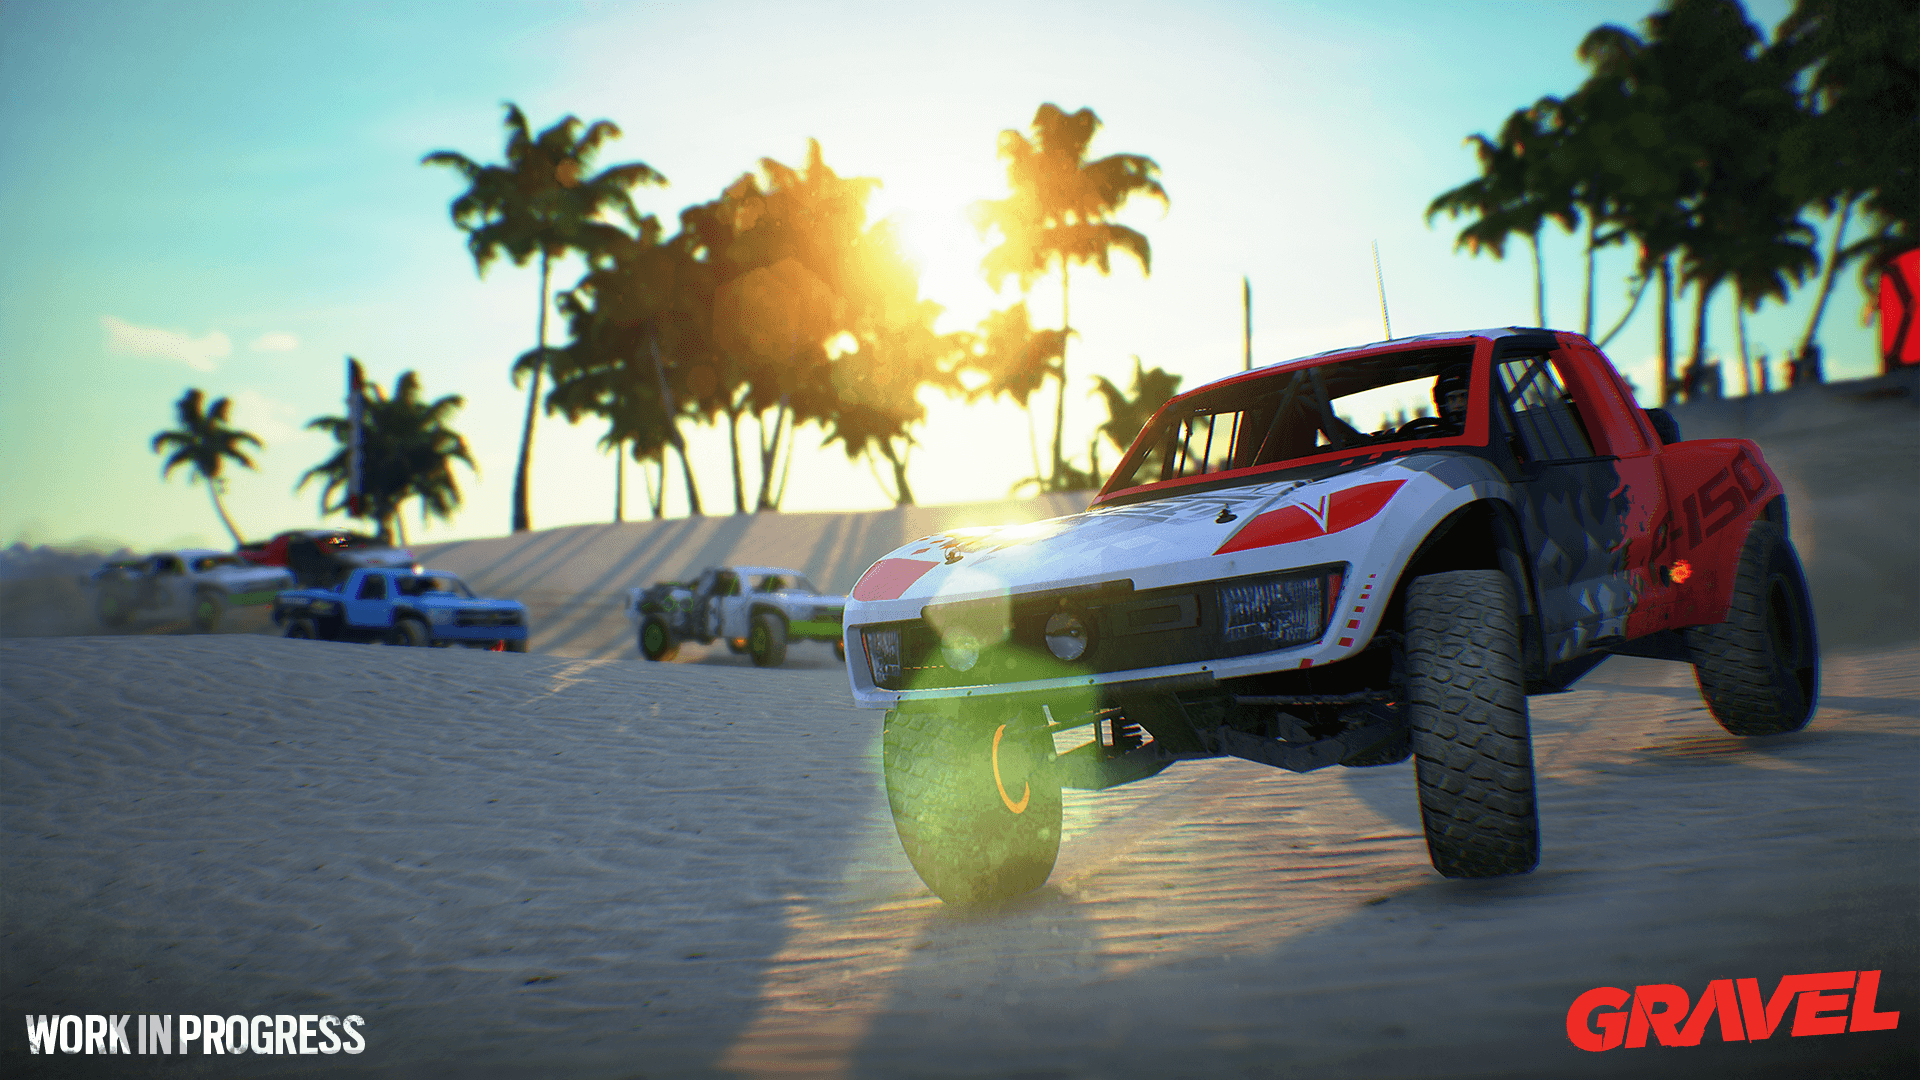 Preview: 'Gravel' An Off Road Racer That May Be On Right Track